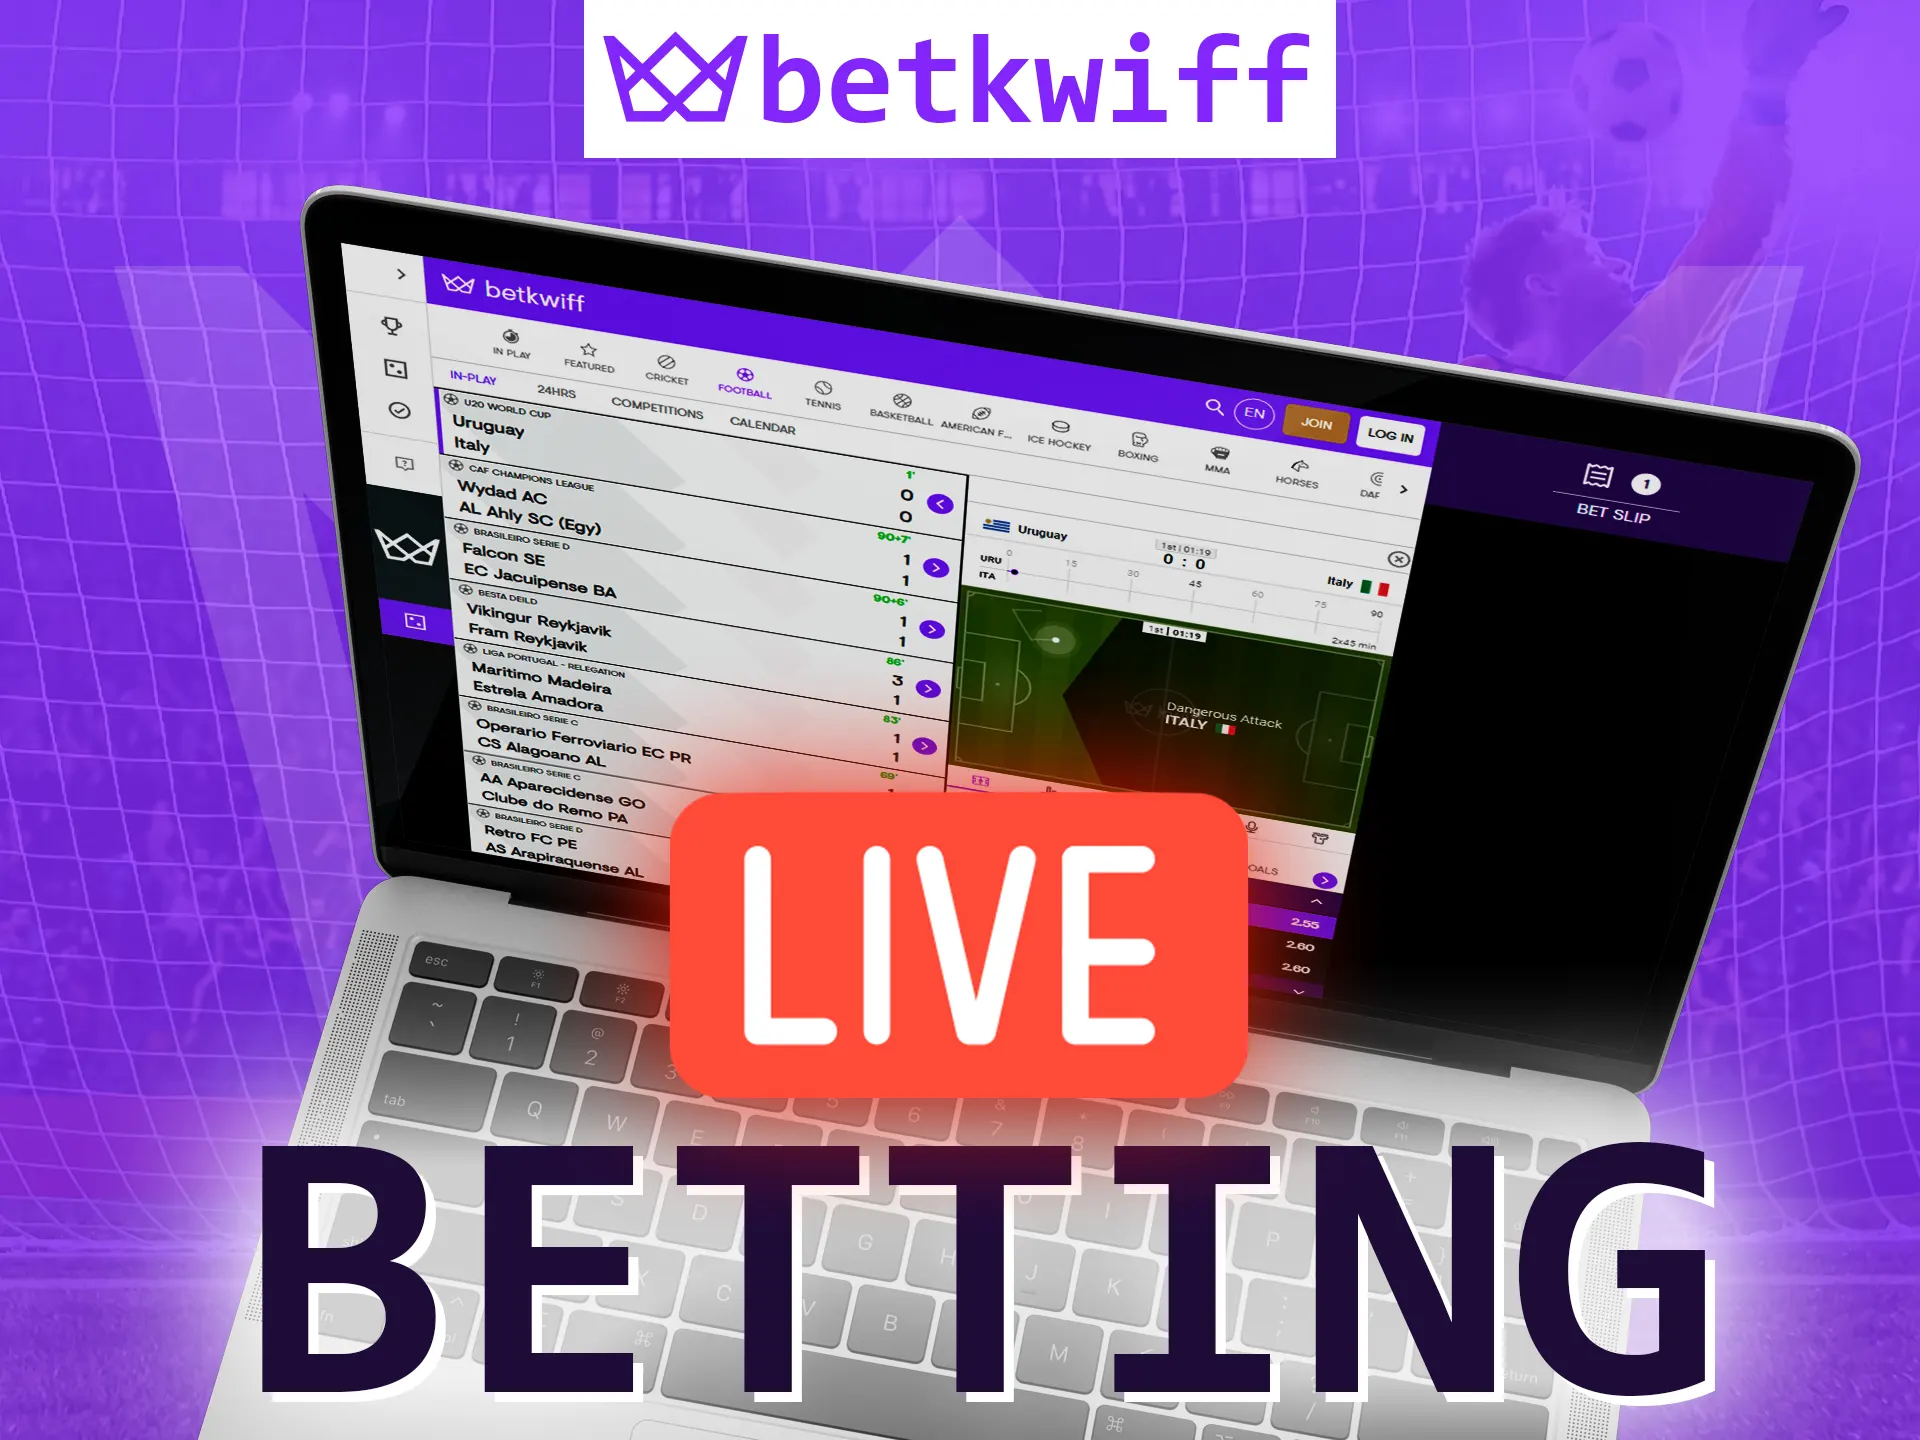 Bet on live matches with Betkwiff.